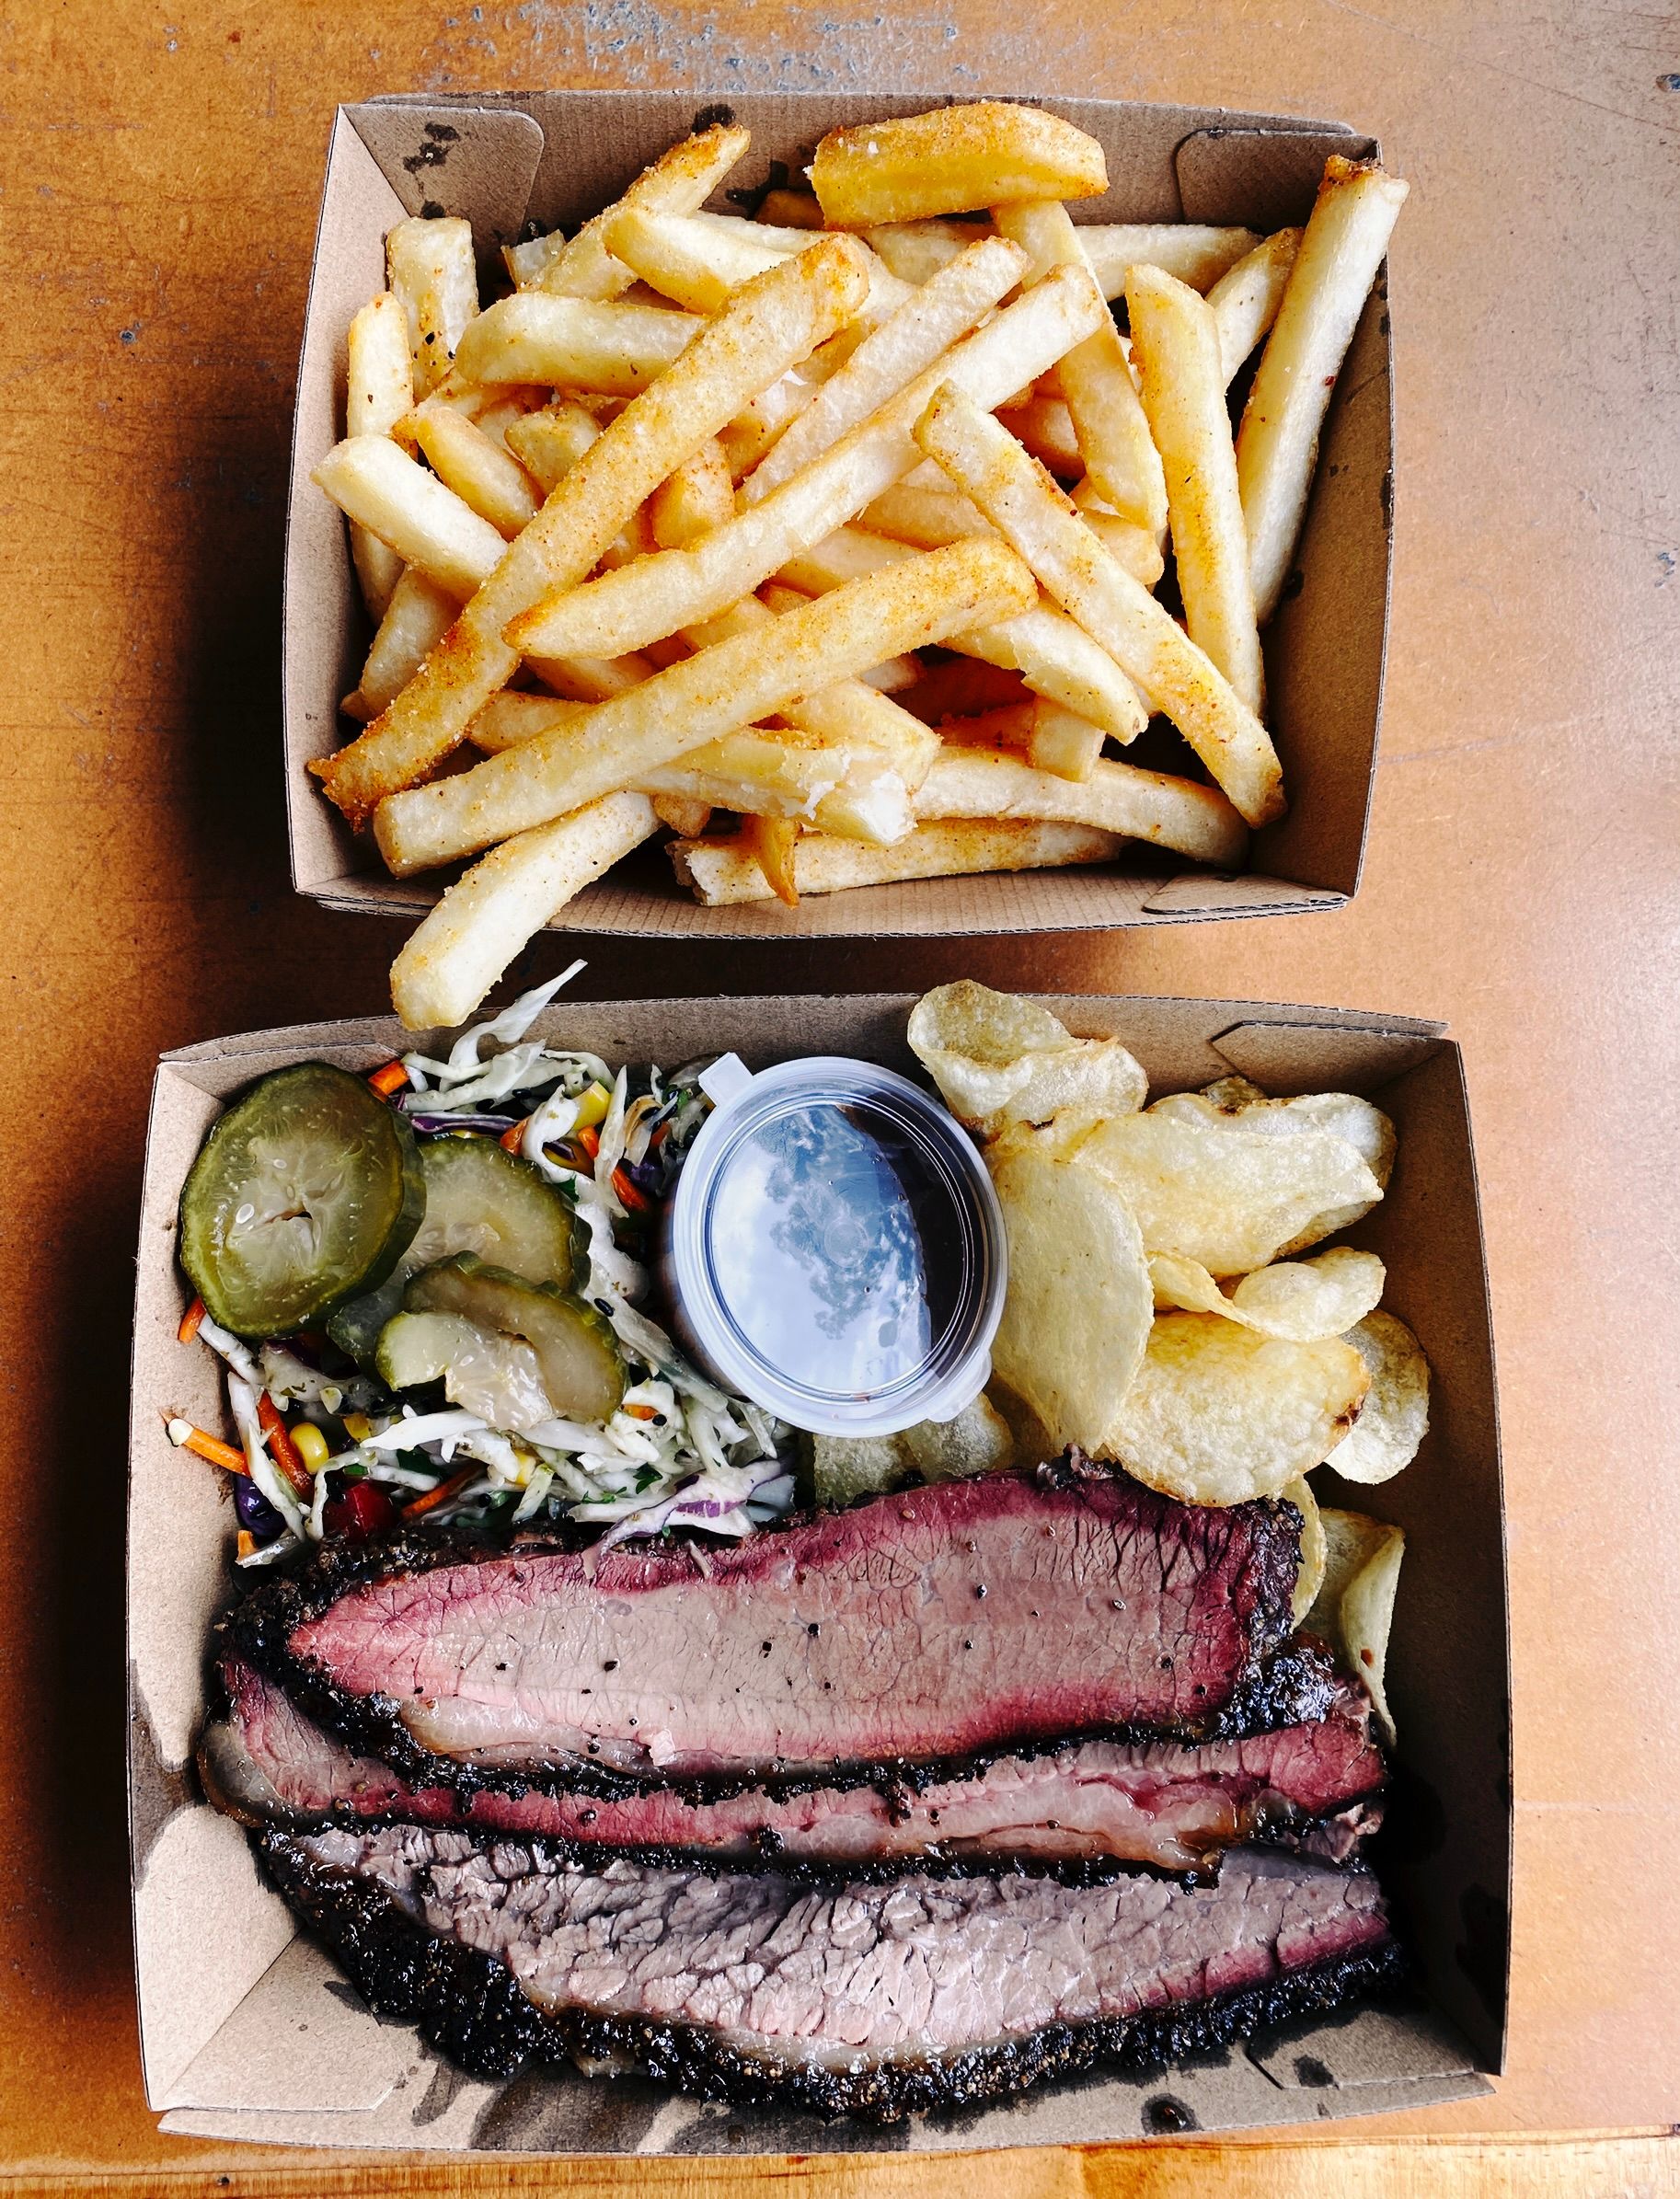 A photo of two cardboard containers, one has three slices of beef brisket along with potato chips, some pickles, slaw, and a container of barbecue sauce, and the other has hot chips in it.